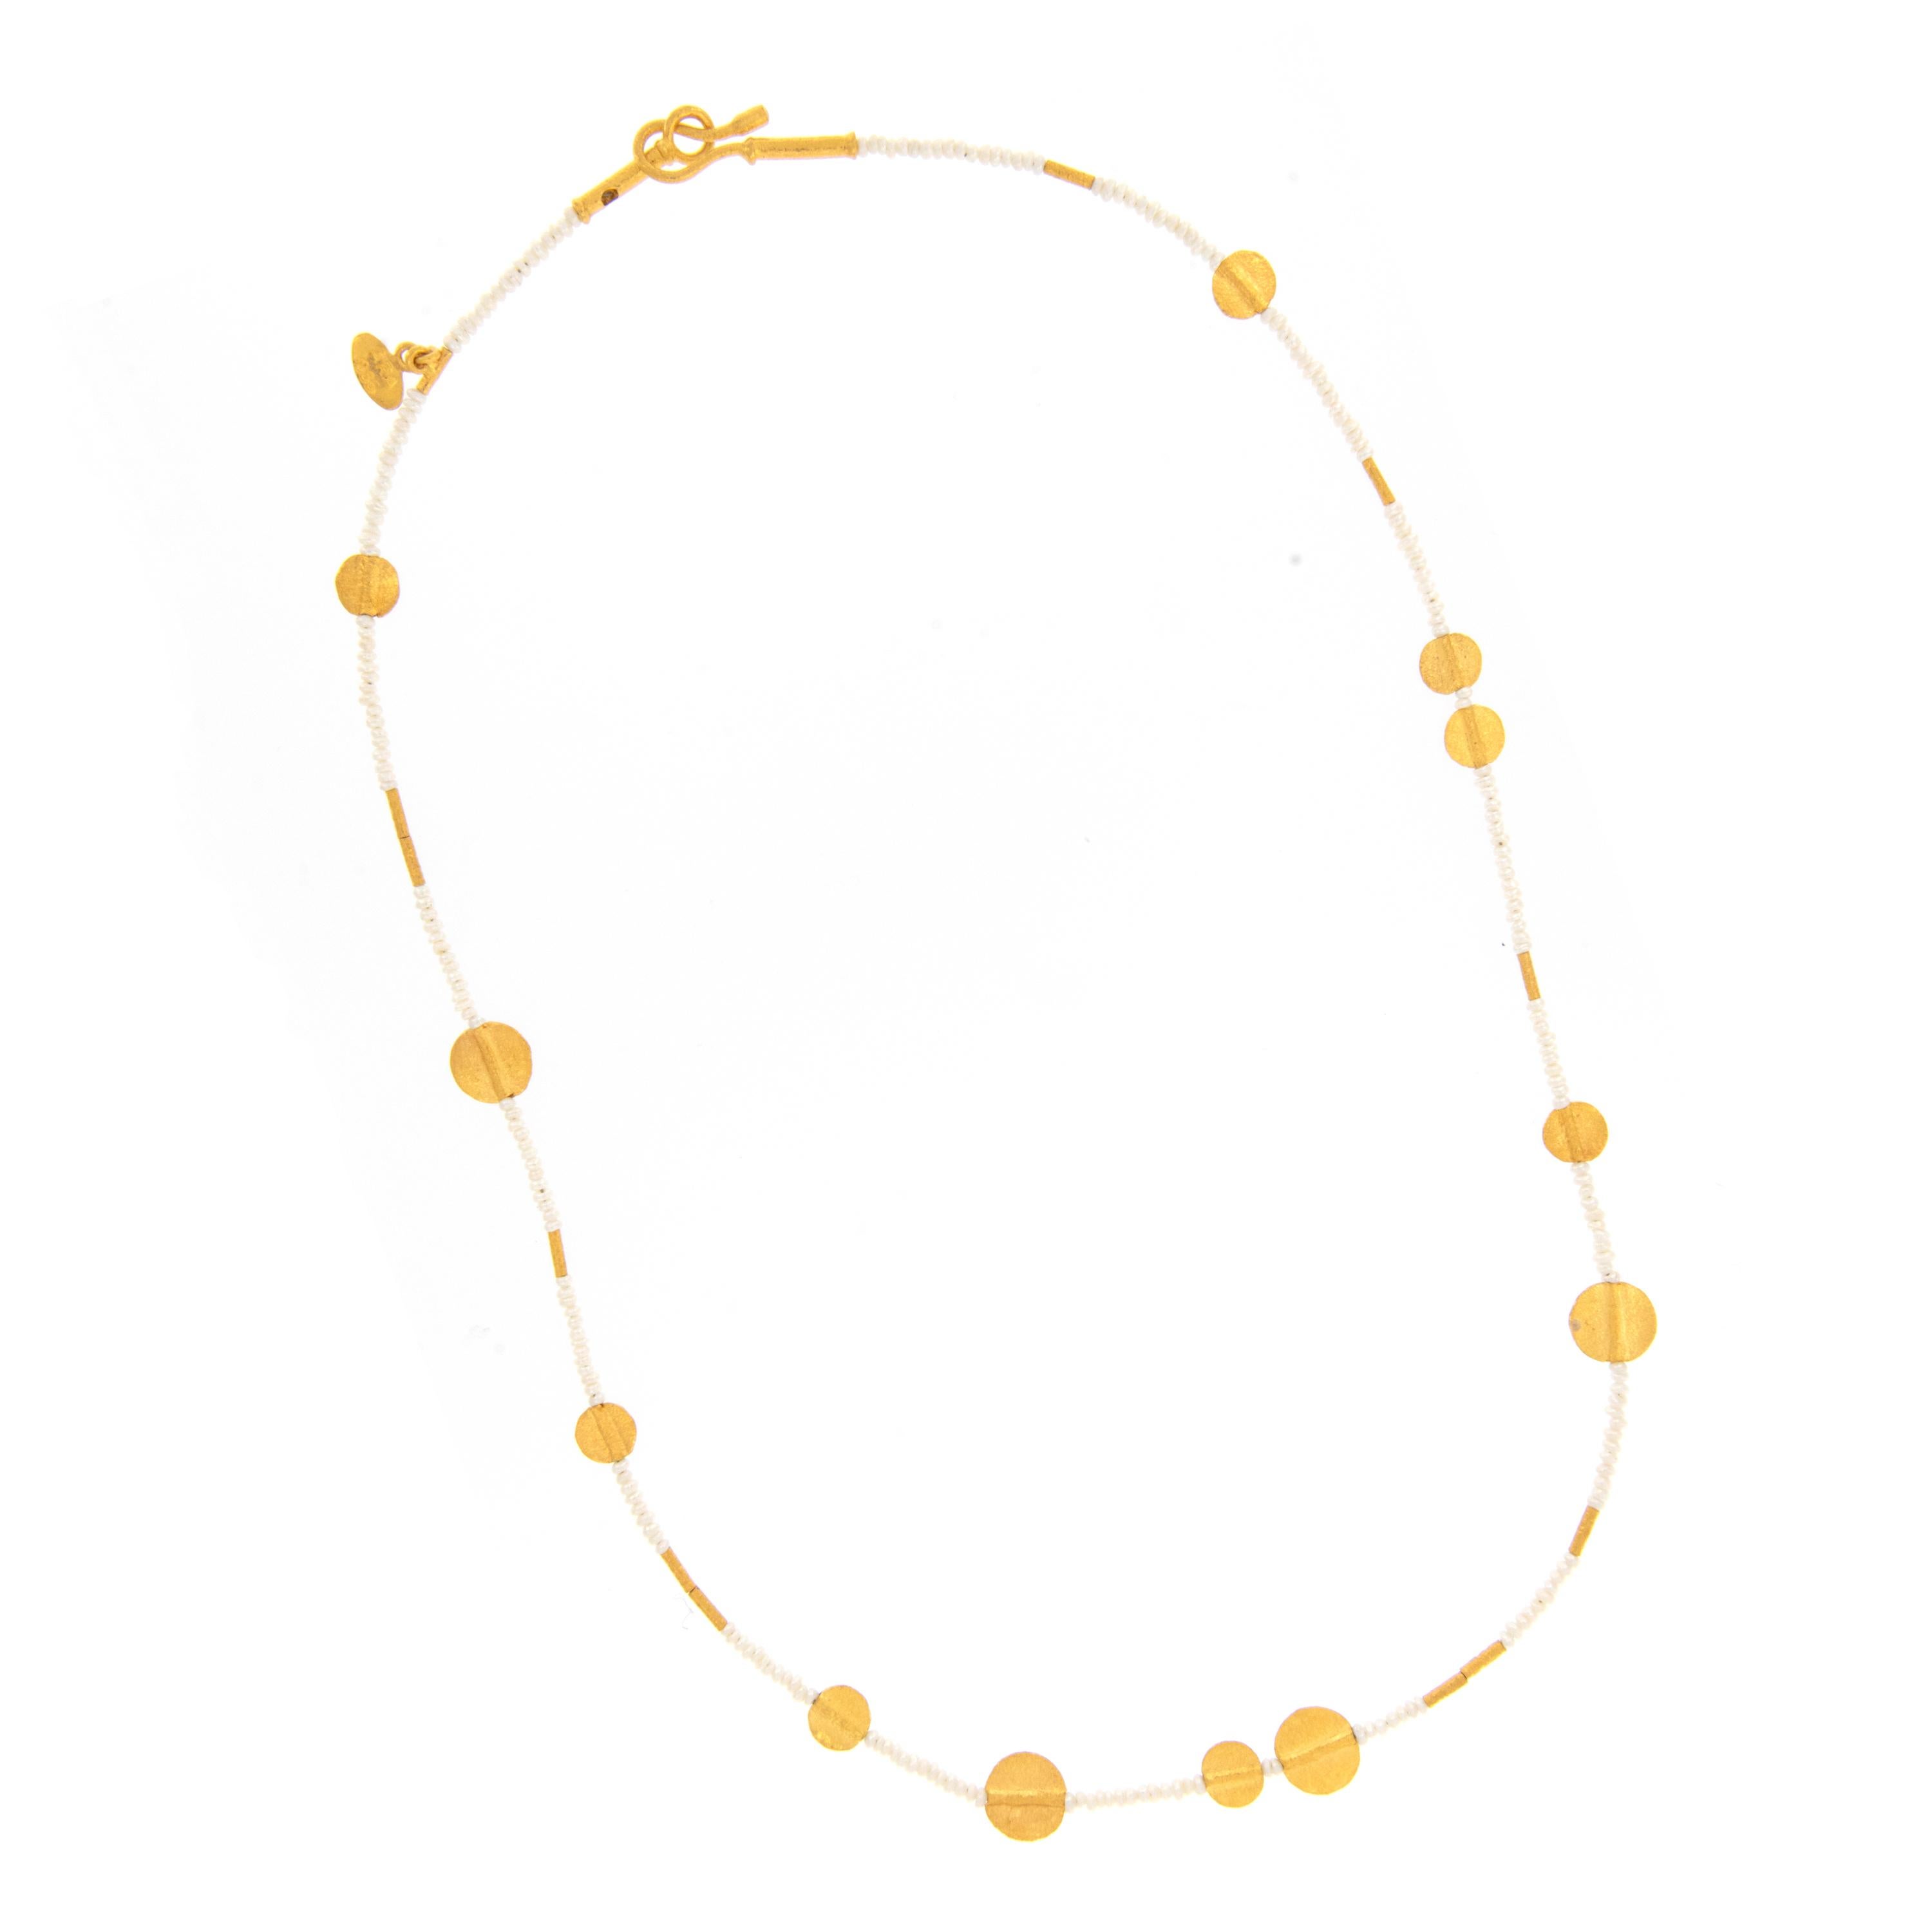 A perfect combination - pure 24 karat yellow gold & pearls! Pearls had long been known to symbolize luxury, grace and purity. Made famous during the Victorian period, seed pearls have been made into jewelry by famous designers like ; Fabergé,